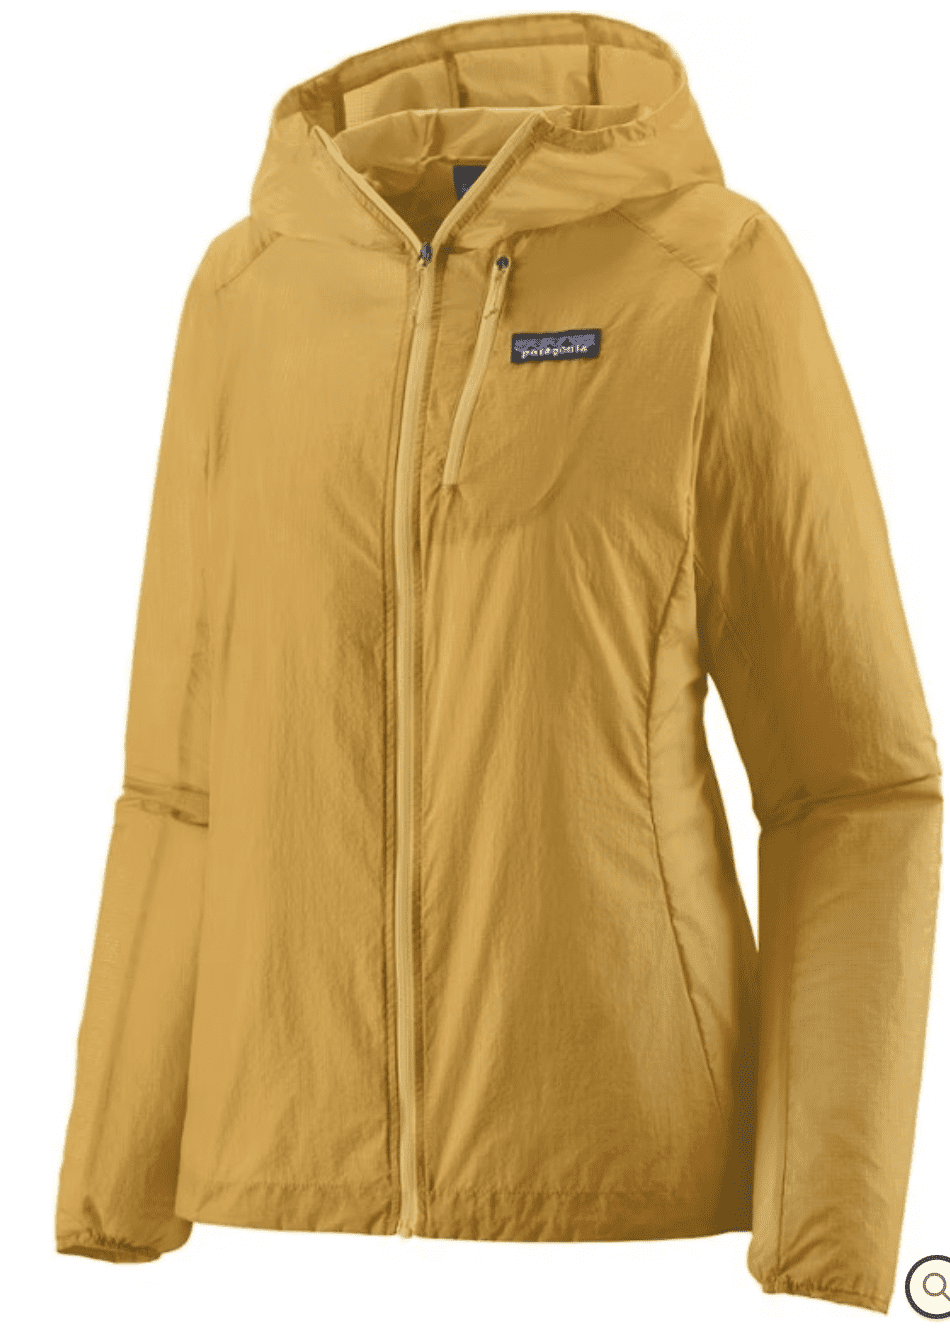 Hiking Jackets for Women